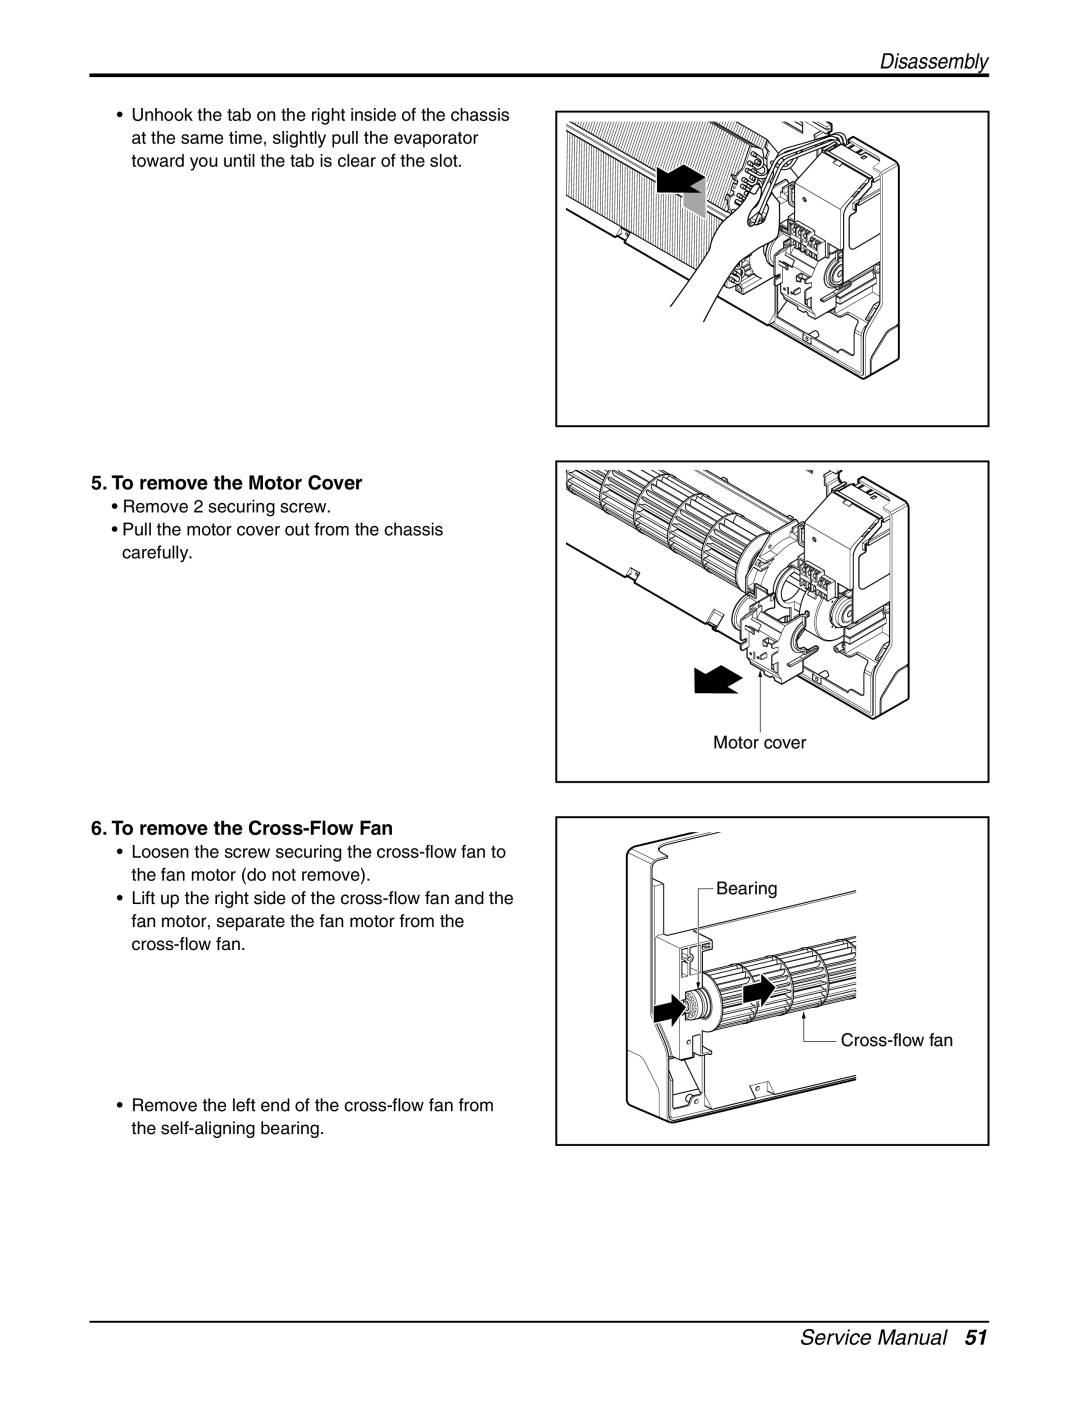 LG Electronics AMNH123DEA0 (LMN120HE) Service Manual, To remove the Motor Cover, To remove the Cross-Flow Fan, Disassembly 